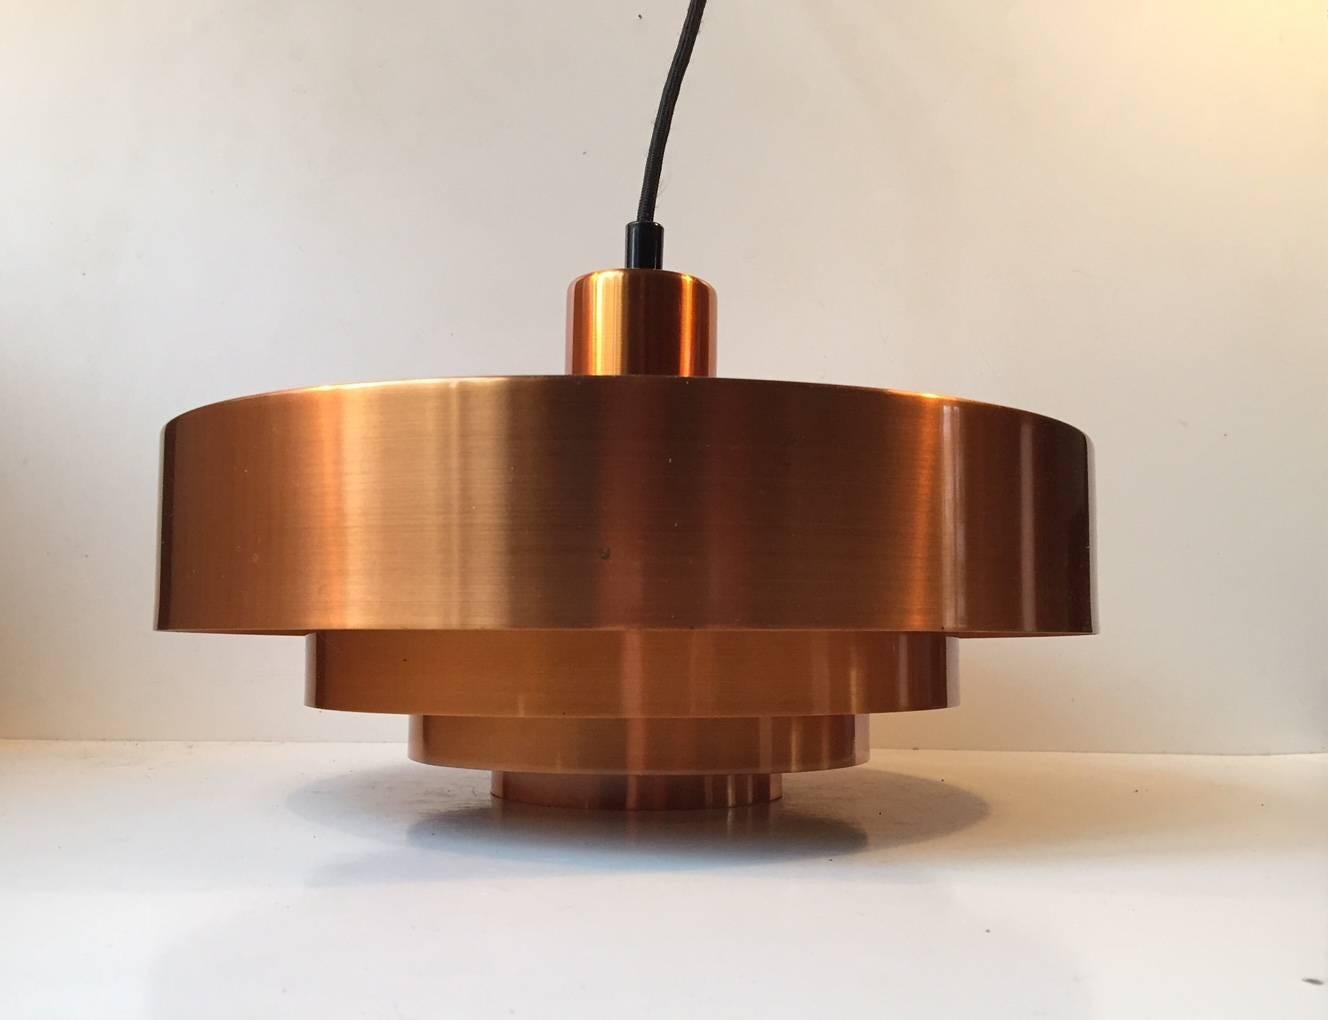 This solid copper pendant lamp was designed by Johannes Hammerborg for Fog & Mørup, Denmark and released as 'Roulet' in the early 1960s. It is one of Hammerborg earliest designs. Nice vintage condition with light ware and even patina to the copper.